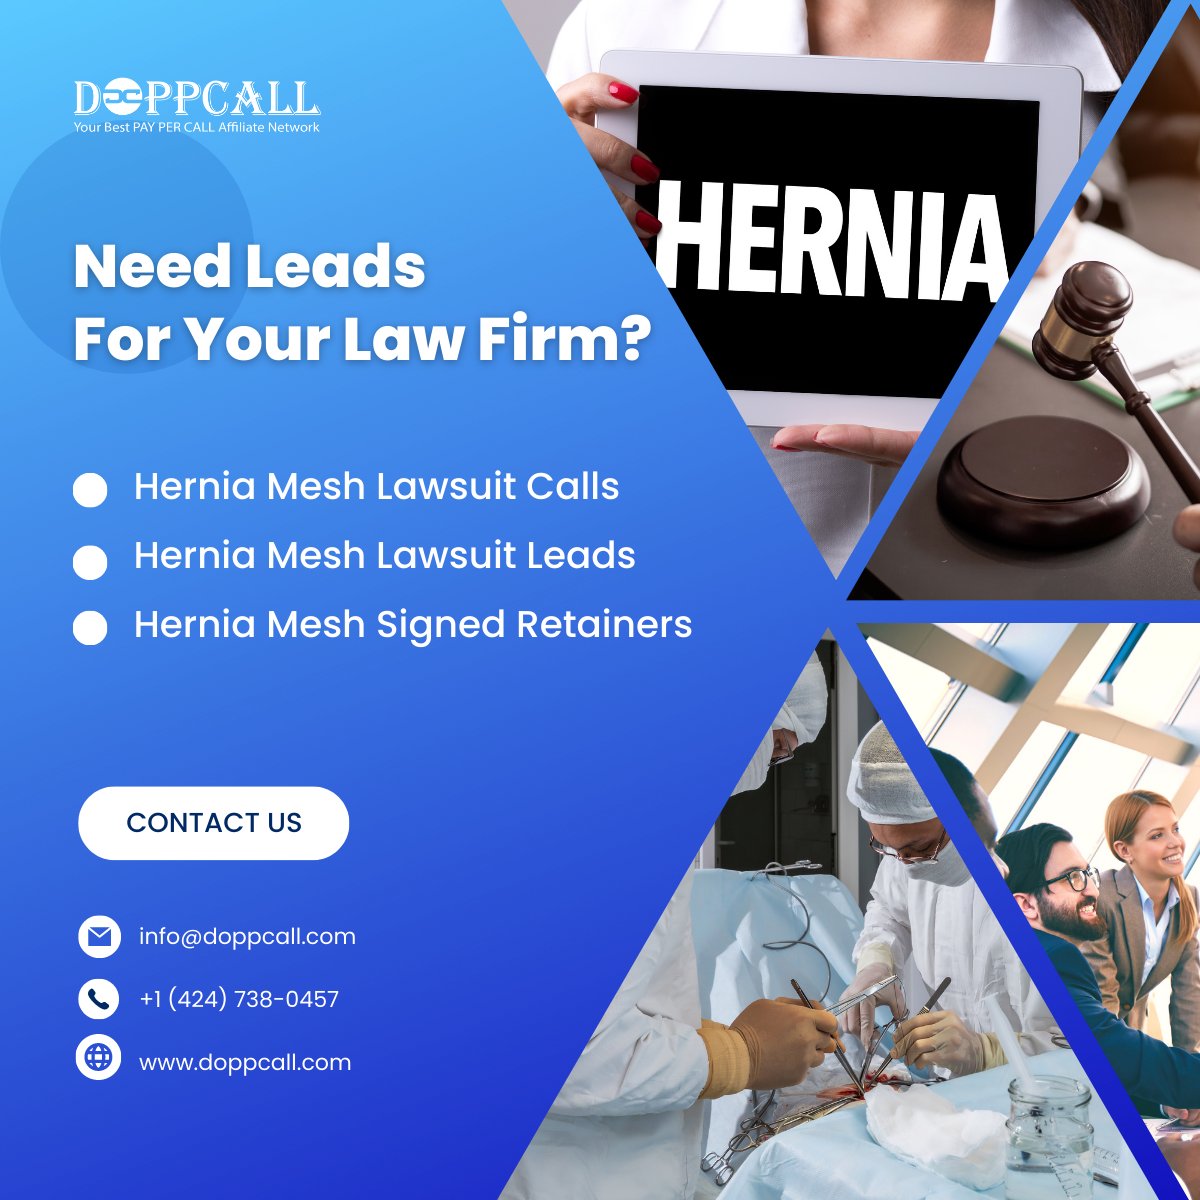 Don't miss out on this opportunity to take your firm to the next level – contact DOPPCALL today via email - at info@doppcall.com to learn more about how we can help you generate Hernia Mesh lawsuit Phone Calls and Leads.

#herniamesh #hmleads #lawsuit #paypercall  #inboundcalls